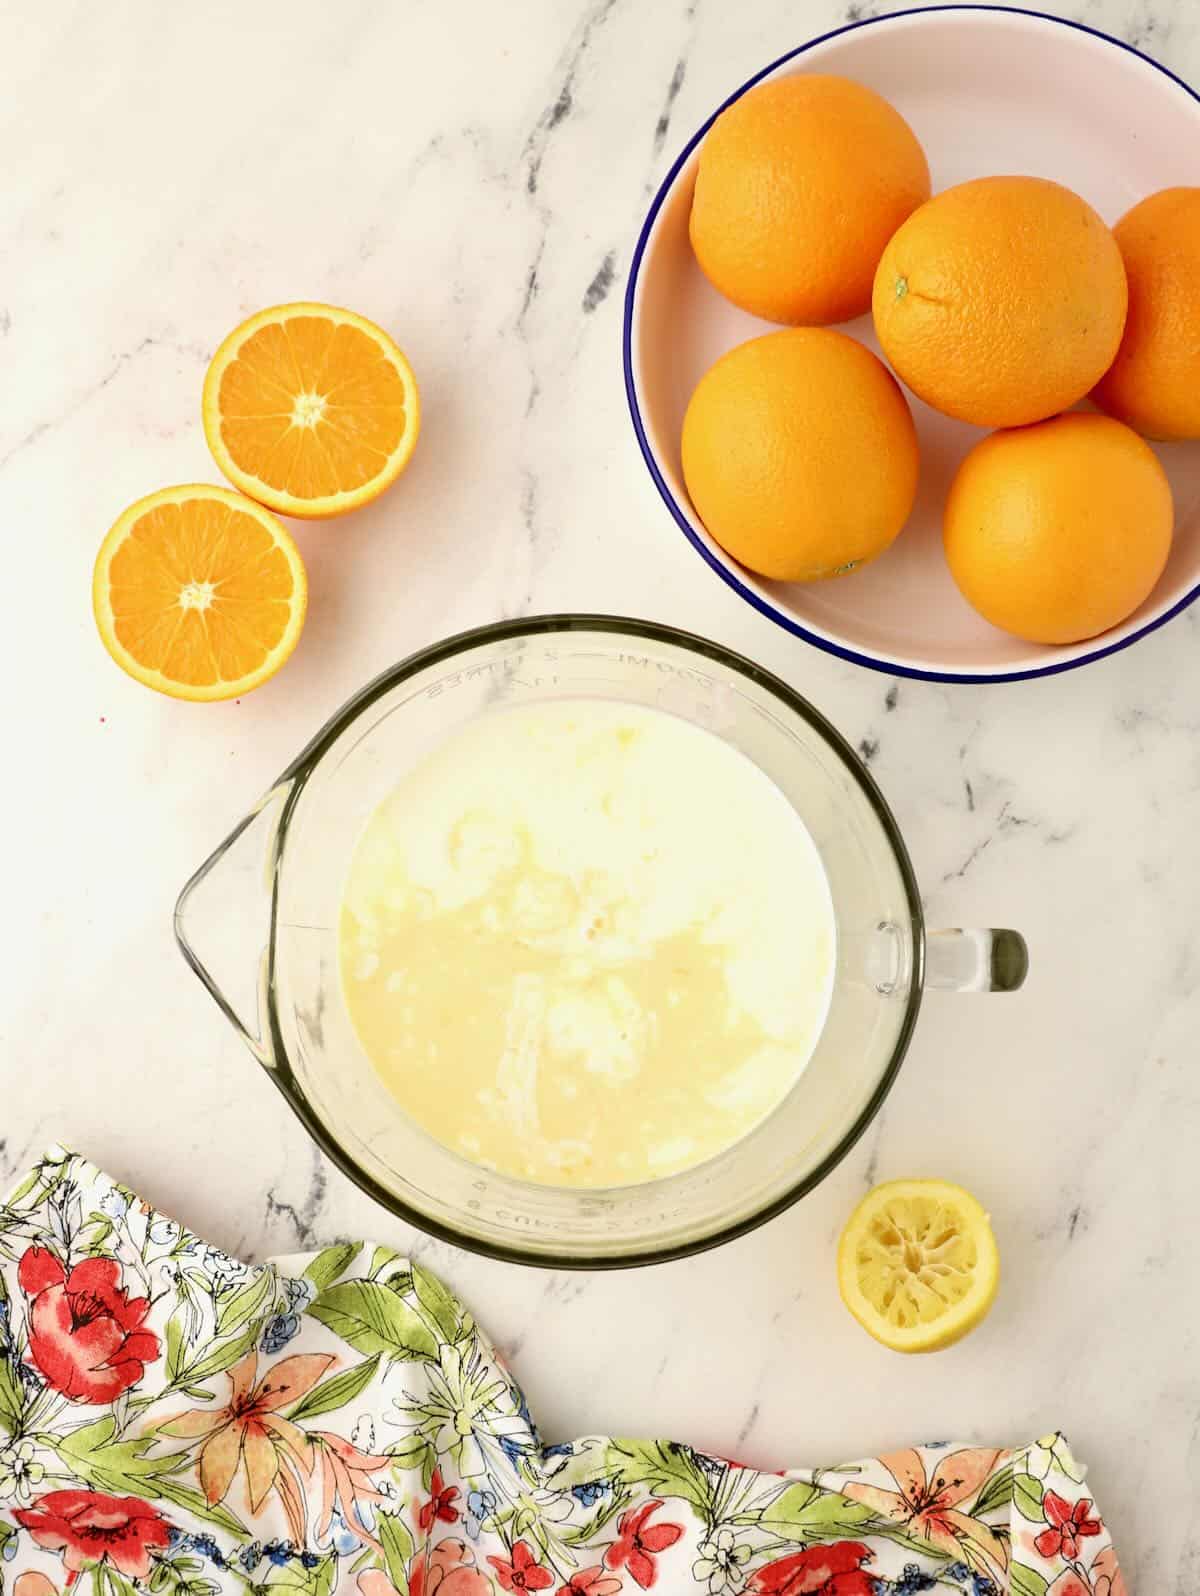 Orange juice and buttermilk in a clear glass bowl. 